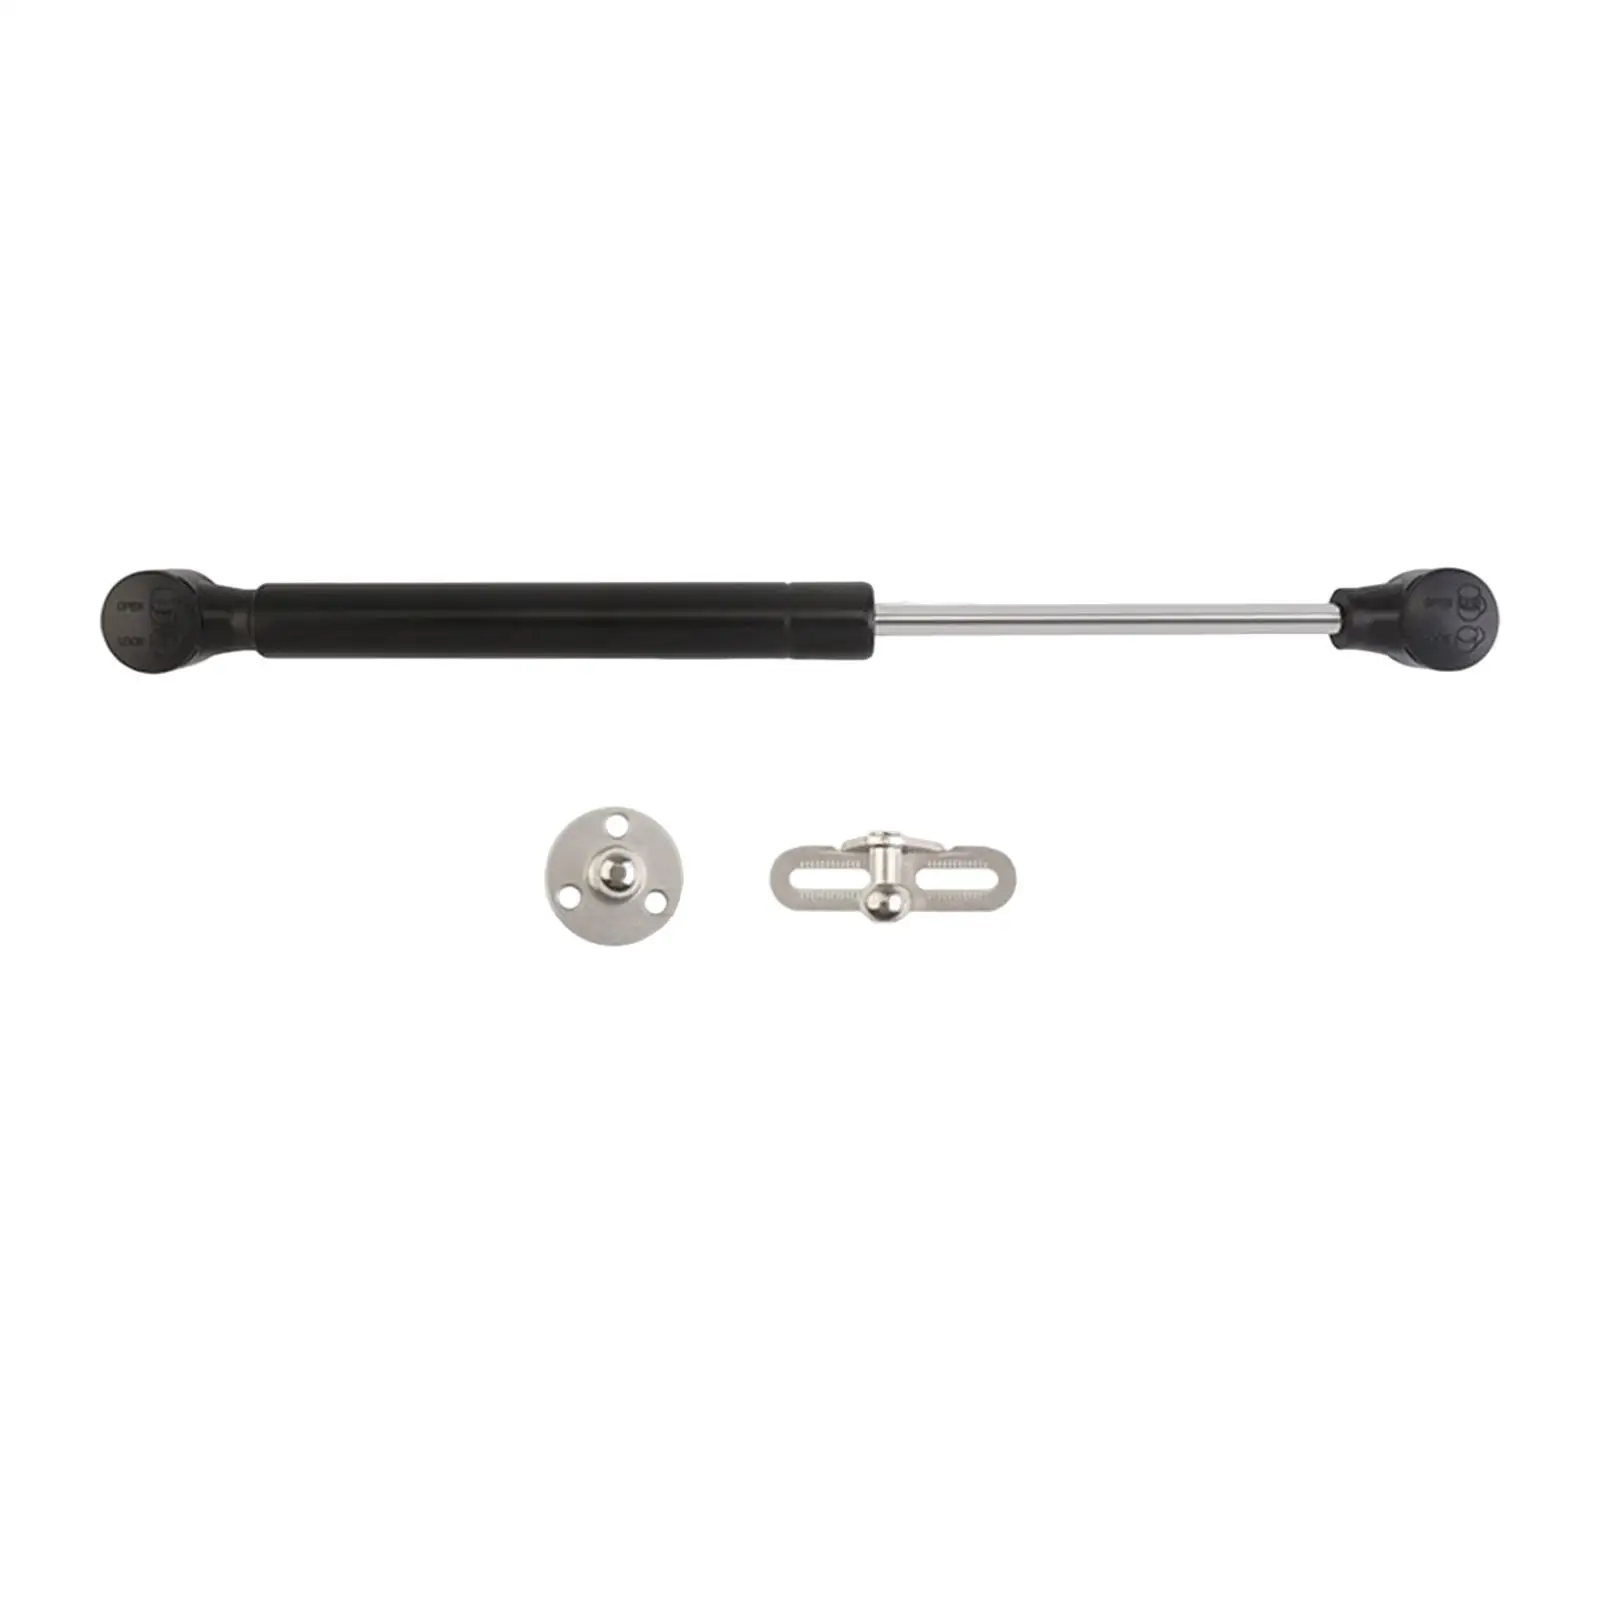 Universal Pneumatic Spring Strut Opening Lift up Telescopic Pneumatic Support Rod for Wardrobe Cabinet Door Drawer Furniture